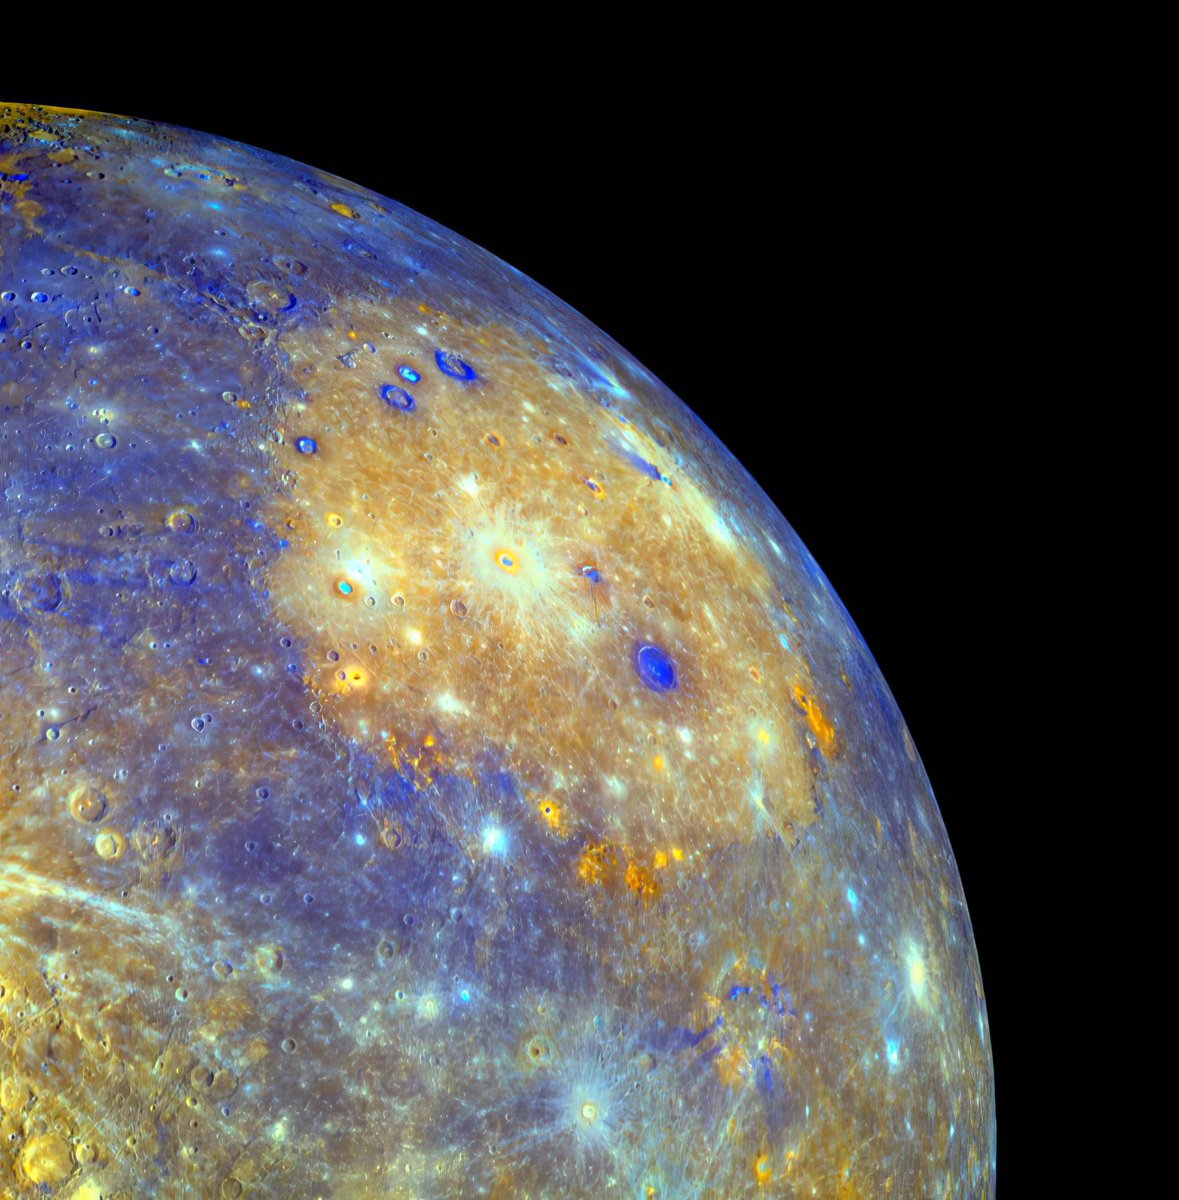 Extremely clear image of Mercury